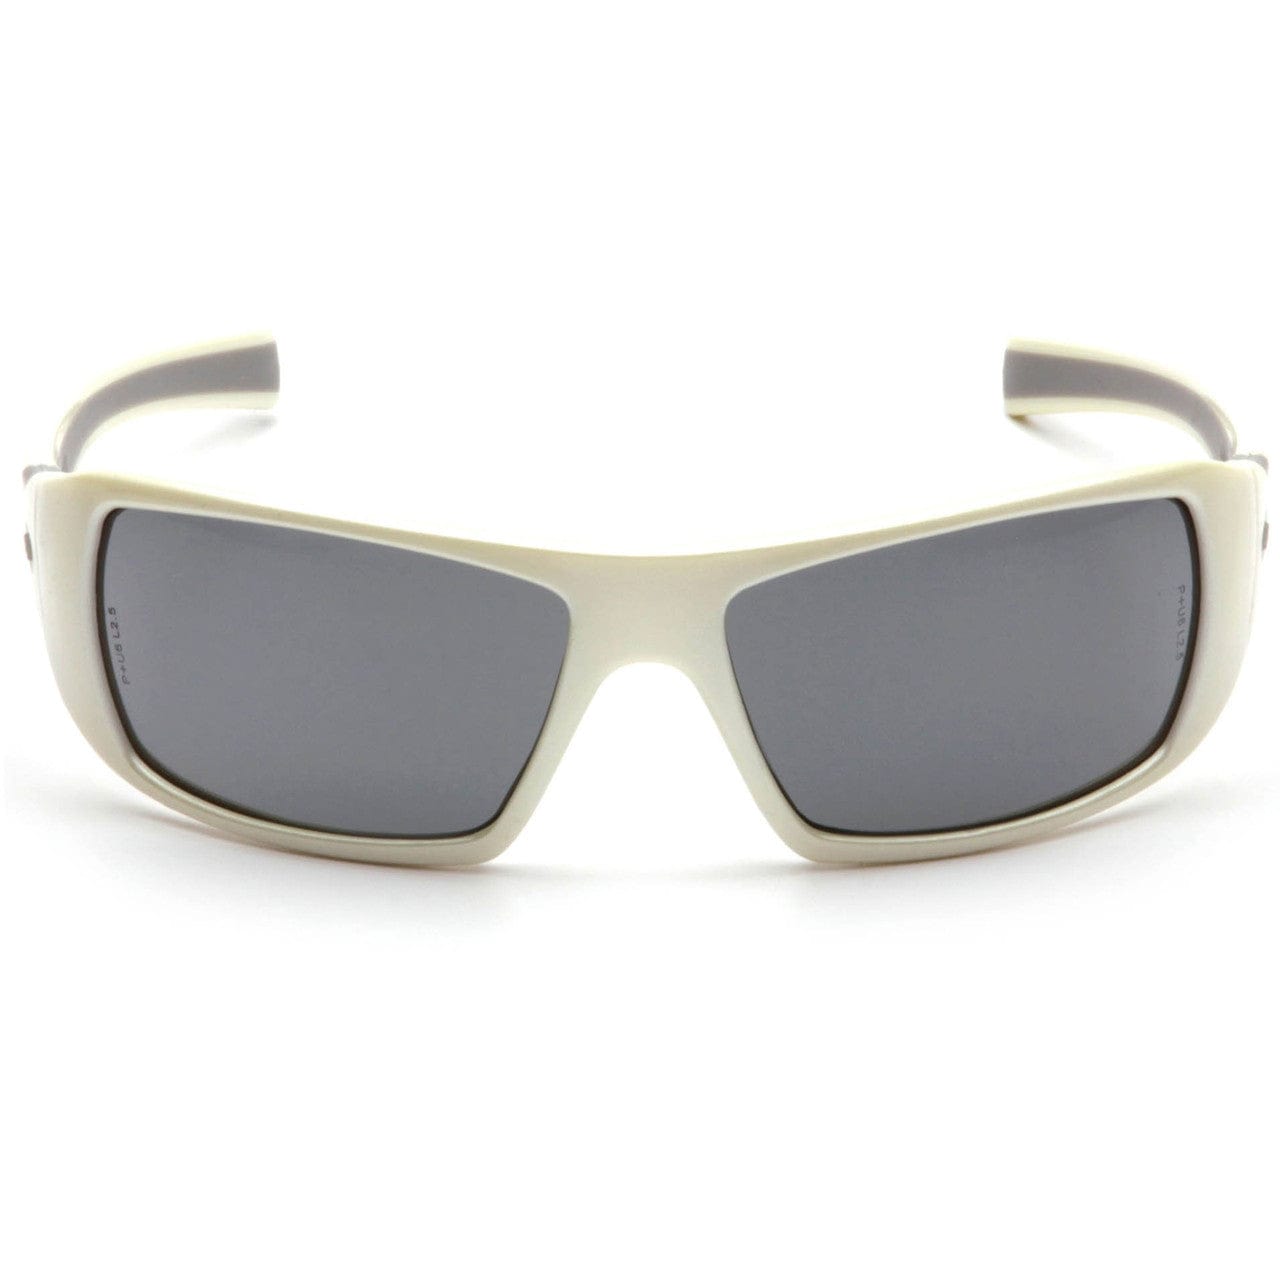 Pyramex Goliath Safety Glasses with Pearl White Frame and Gray Lens SW5620D Front View